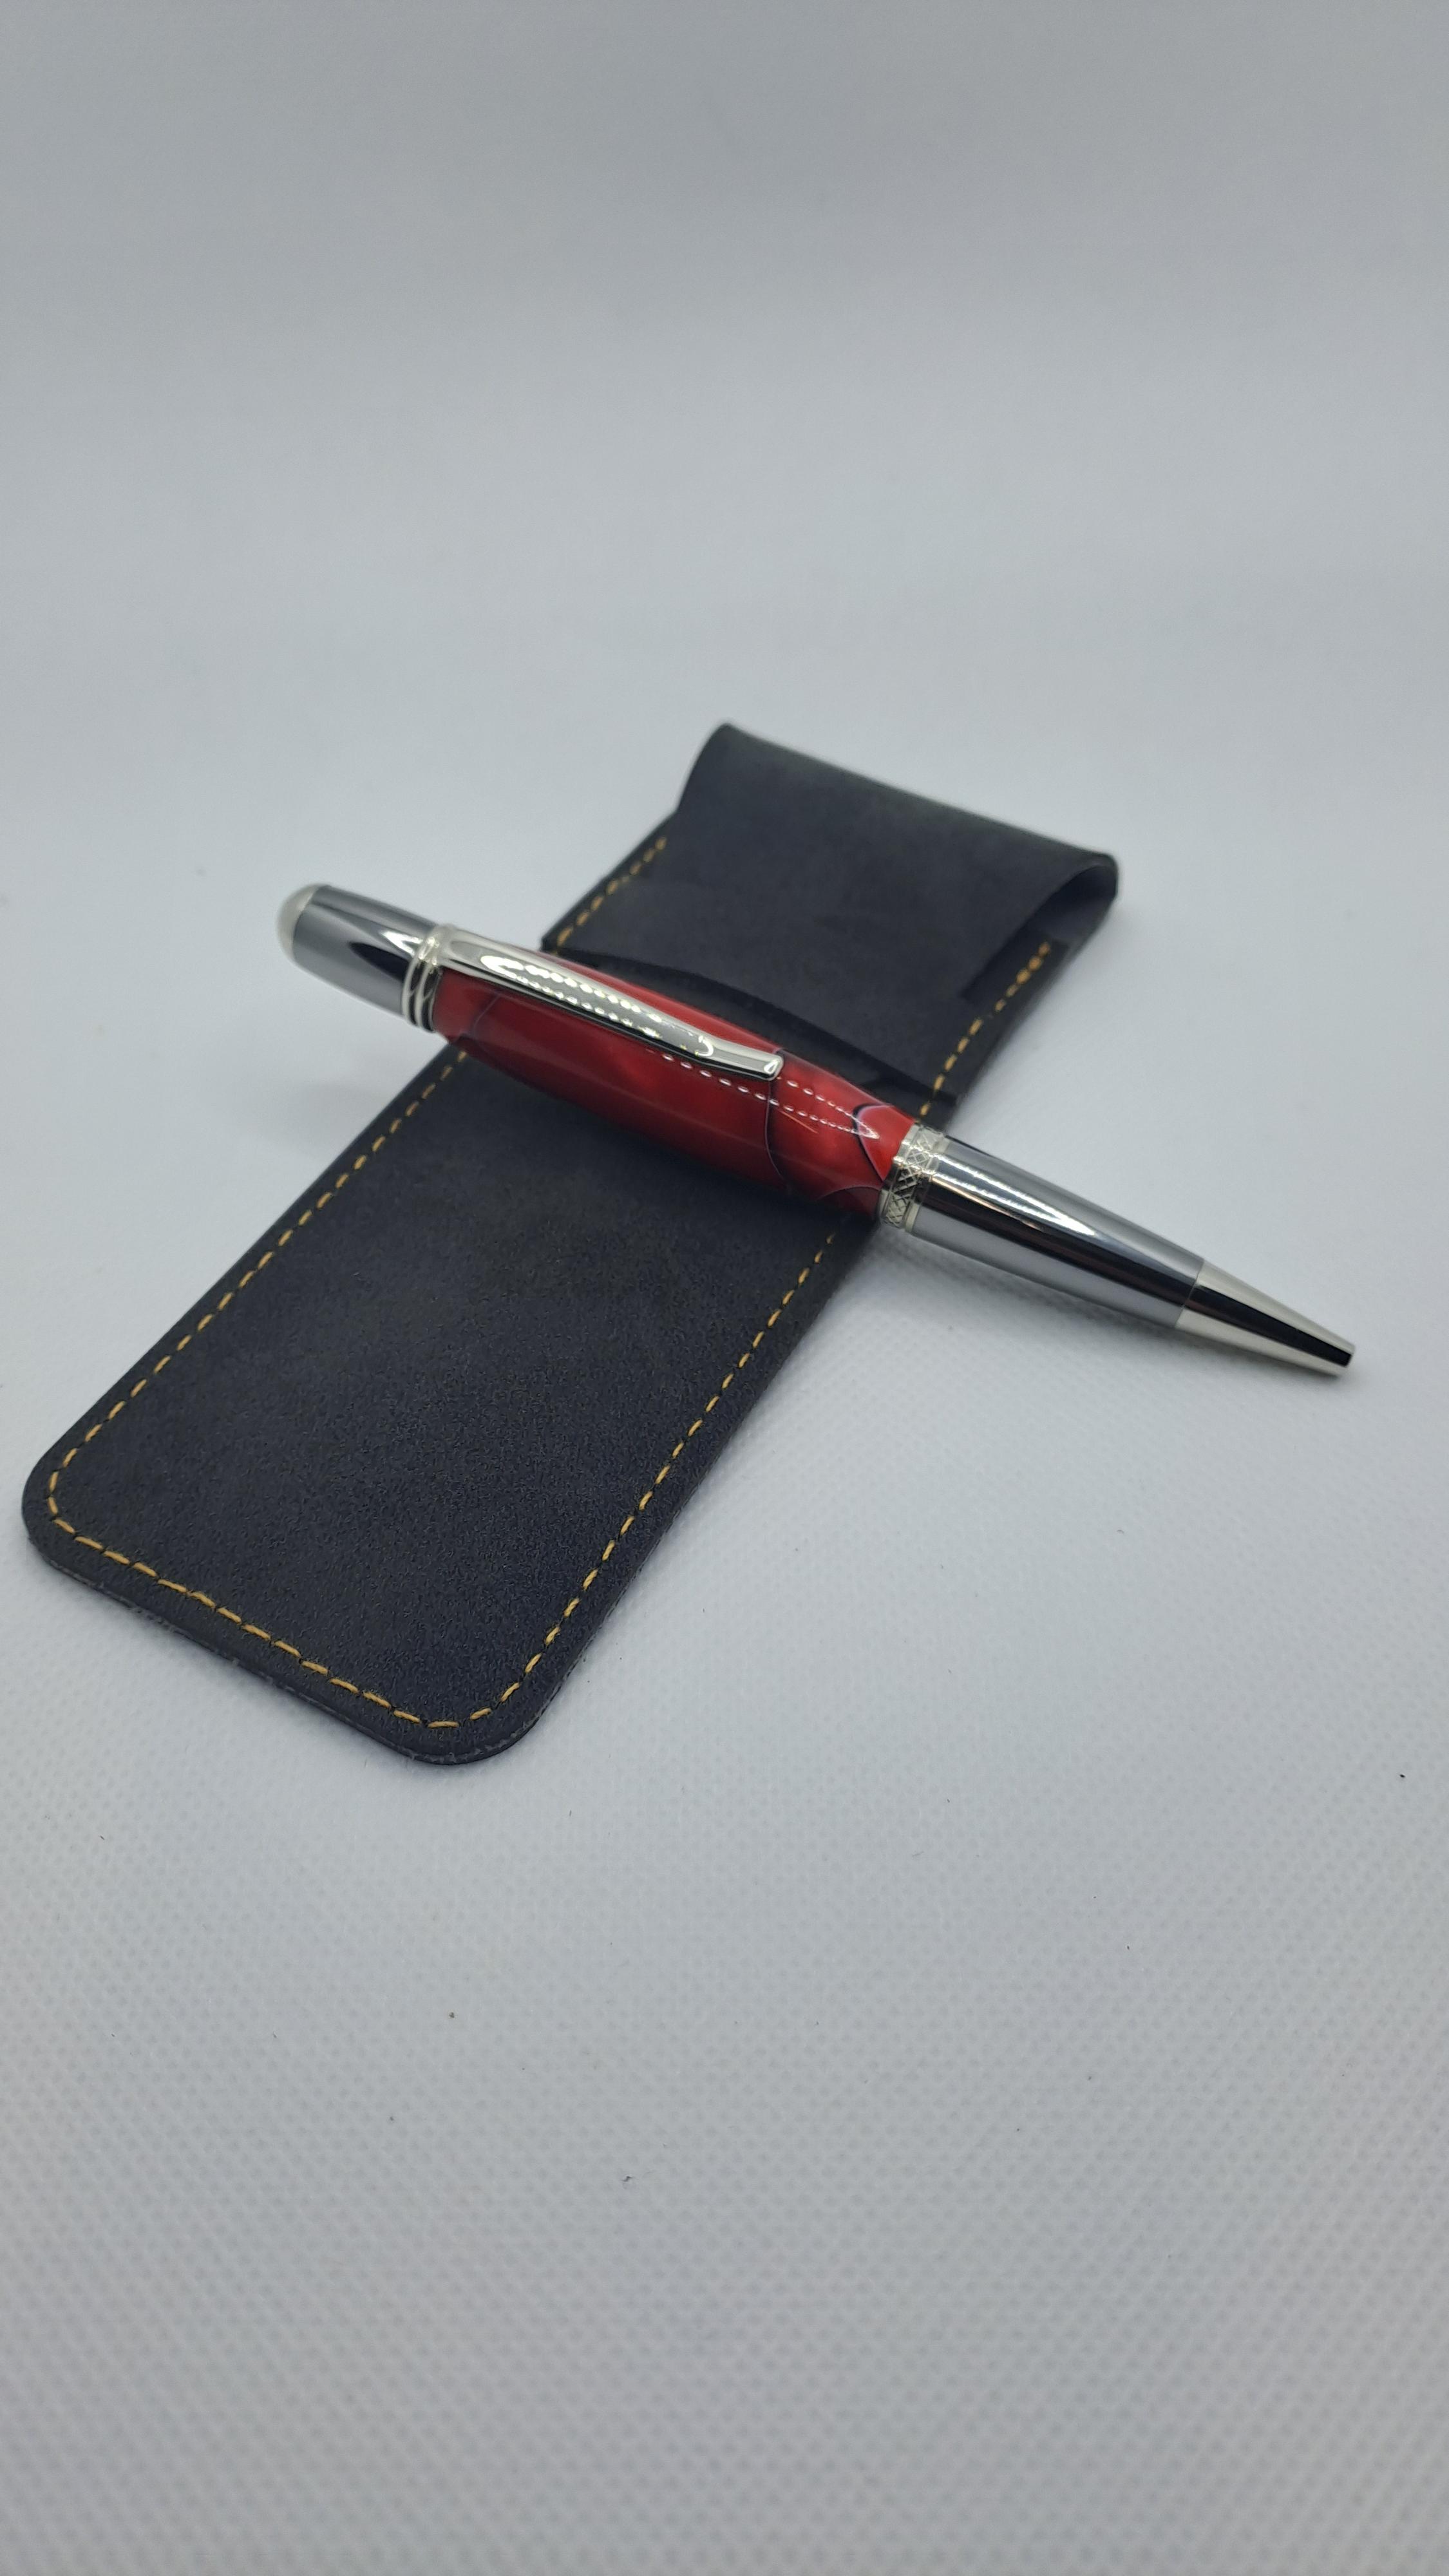 Platinum Venetian pen red acrylic and black PU leather case